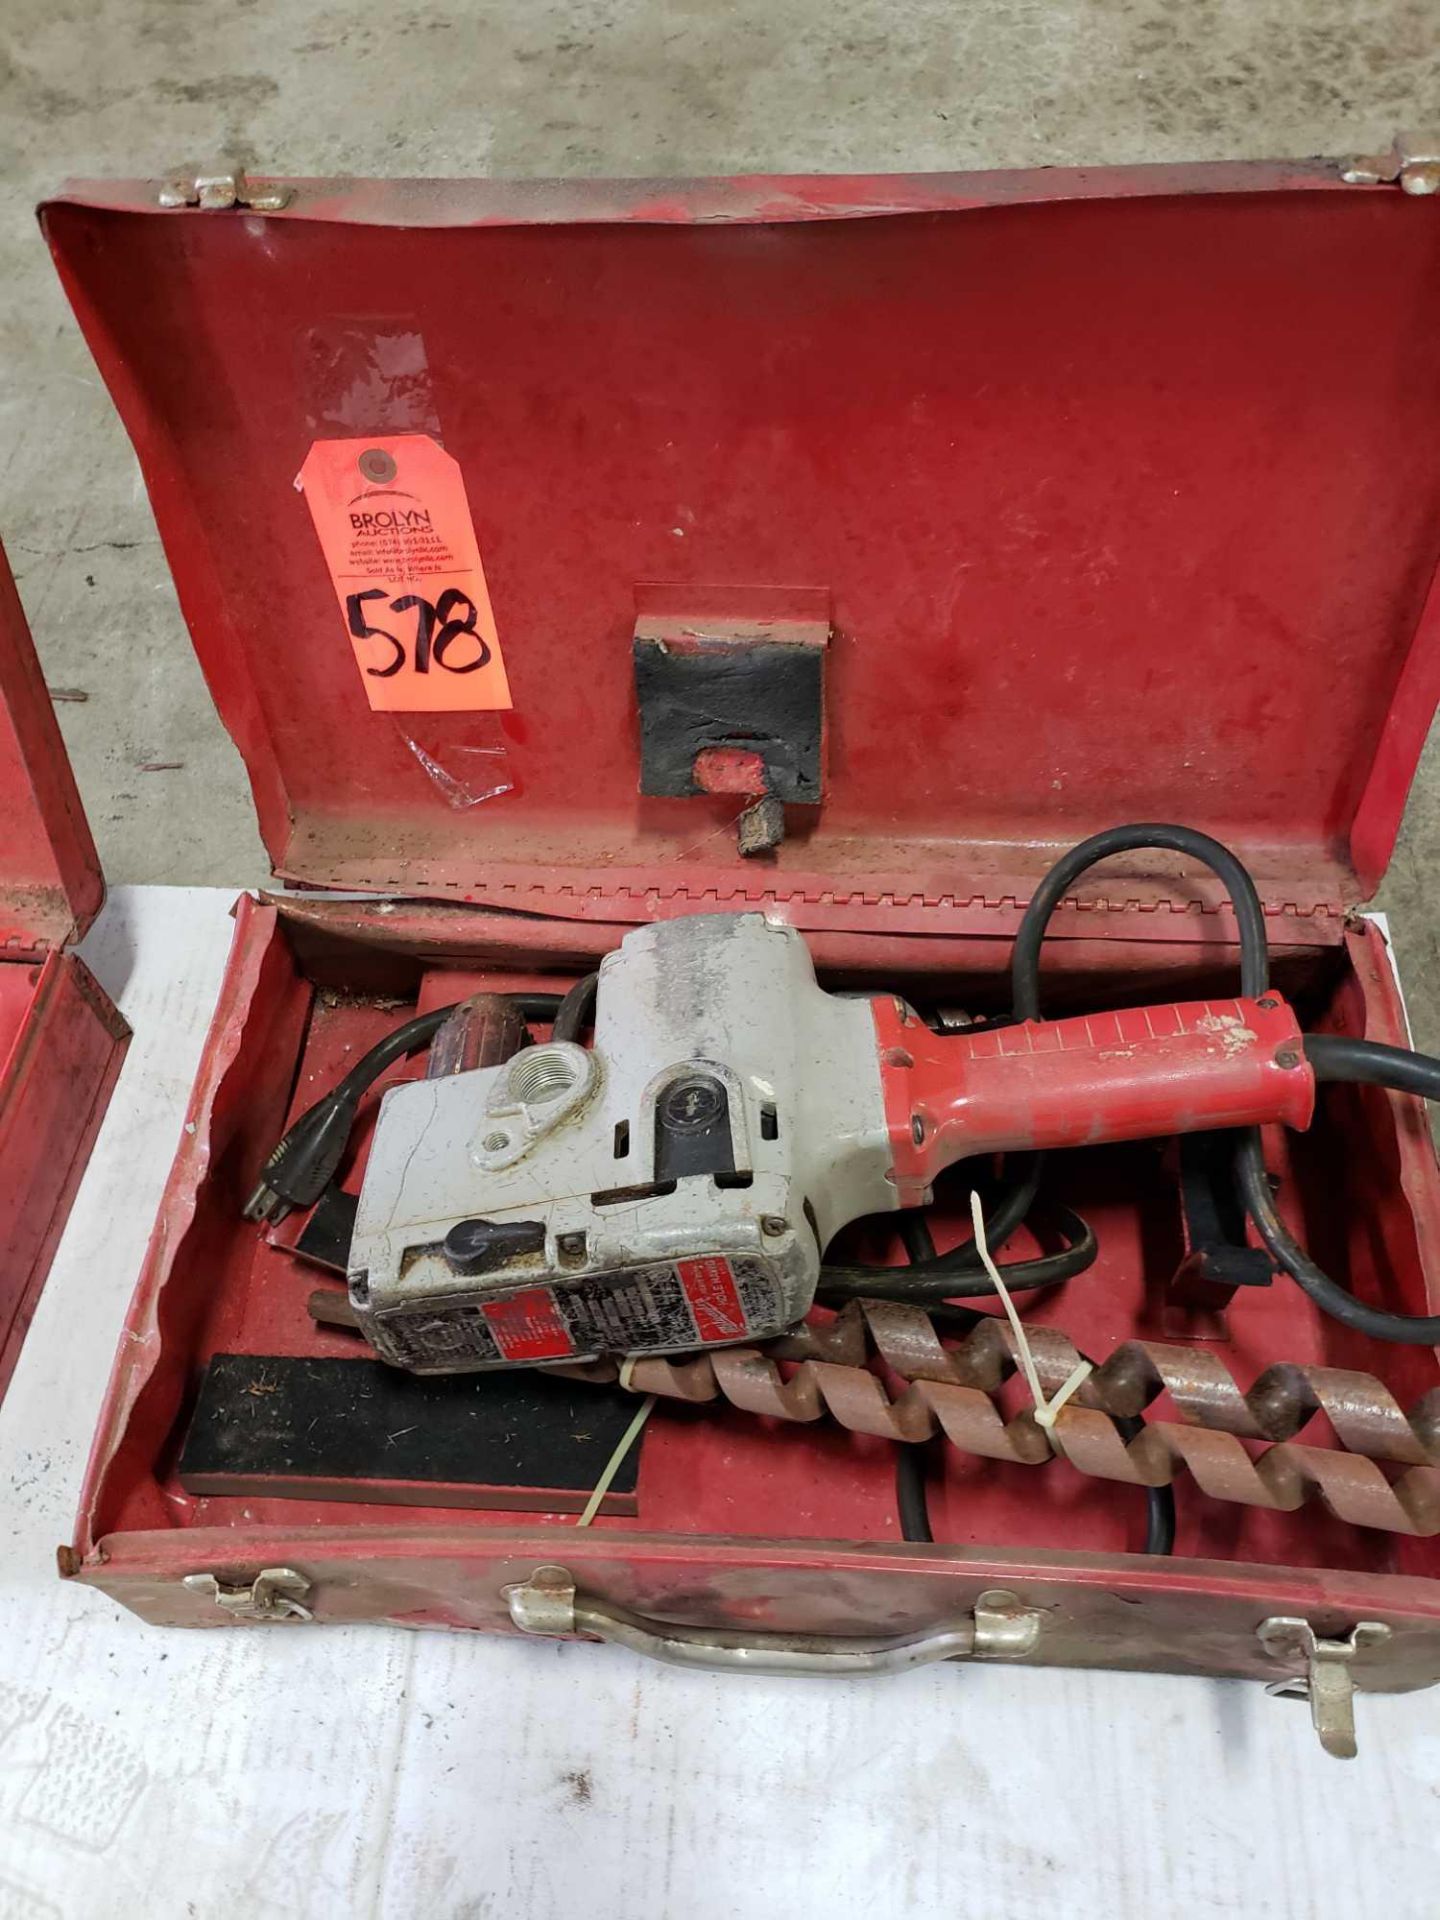 Milwaukee Hole Hawg model 1675-1. Single phase 110v with case and drill bits.